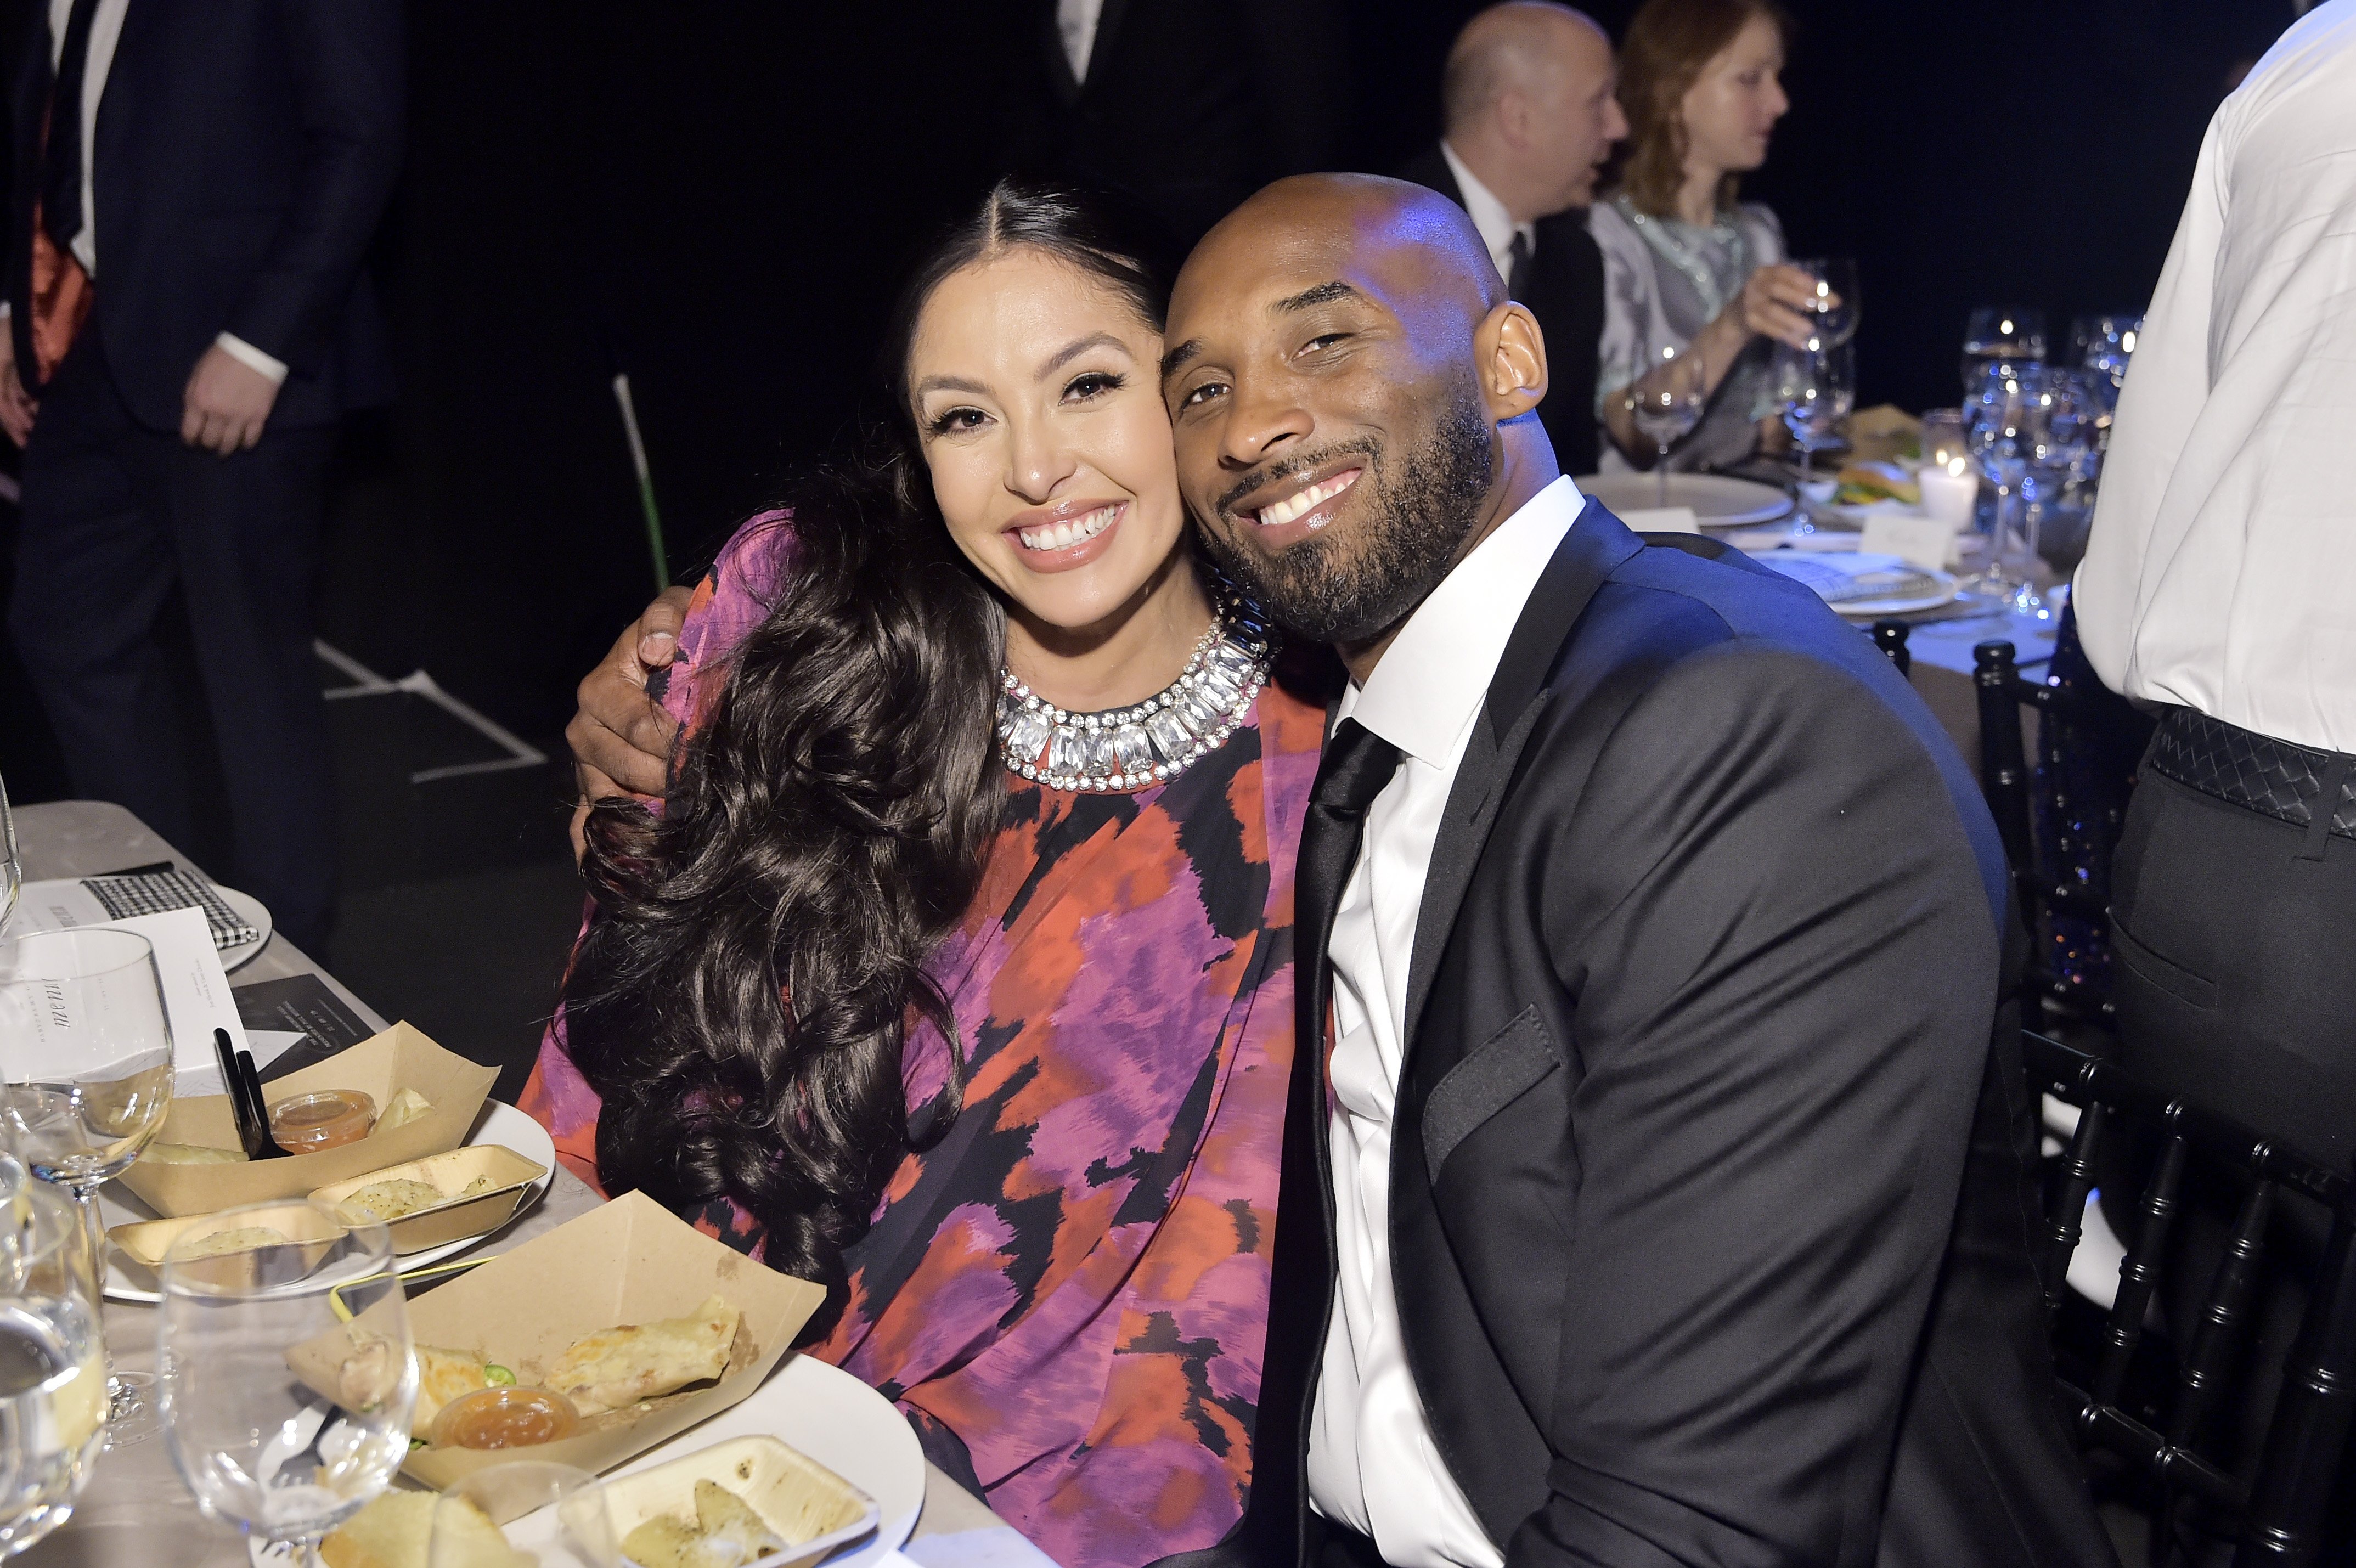 Vanessa Laine Bryant and Kobe Bryant at the 2019 Baby2Baby Gala presented by Paul Mitchell in Los Angeles, California | Photo: Stefanie Keenan/Getty Images for Baby2Baby